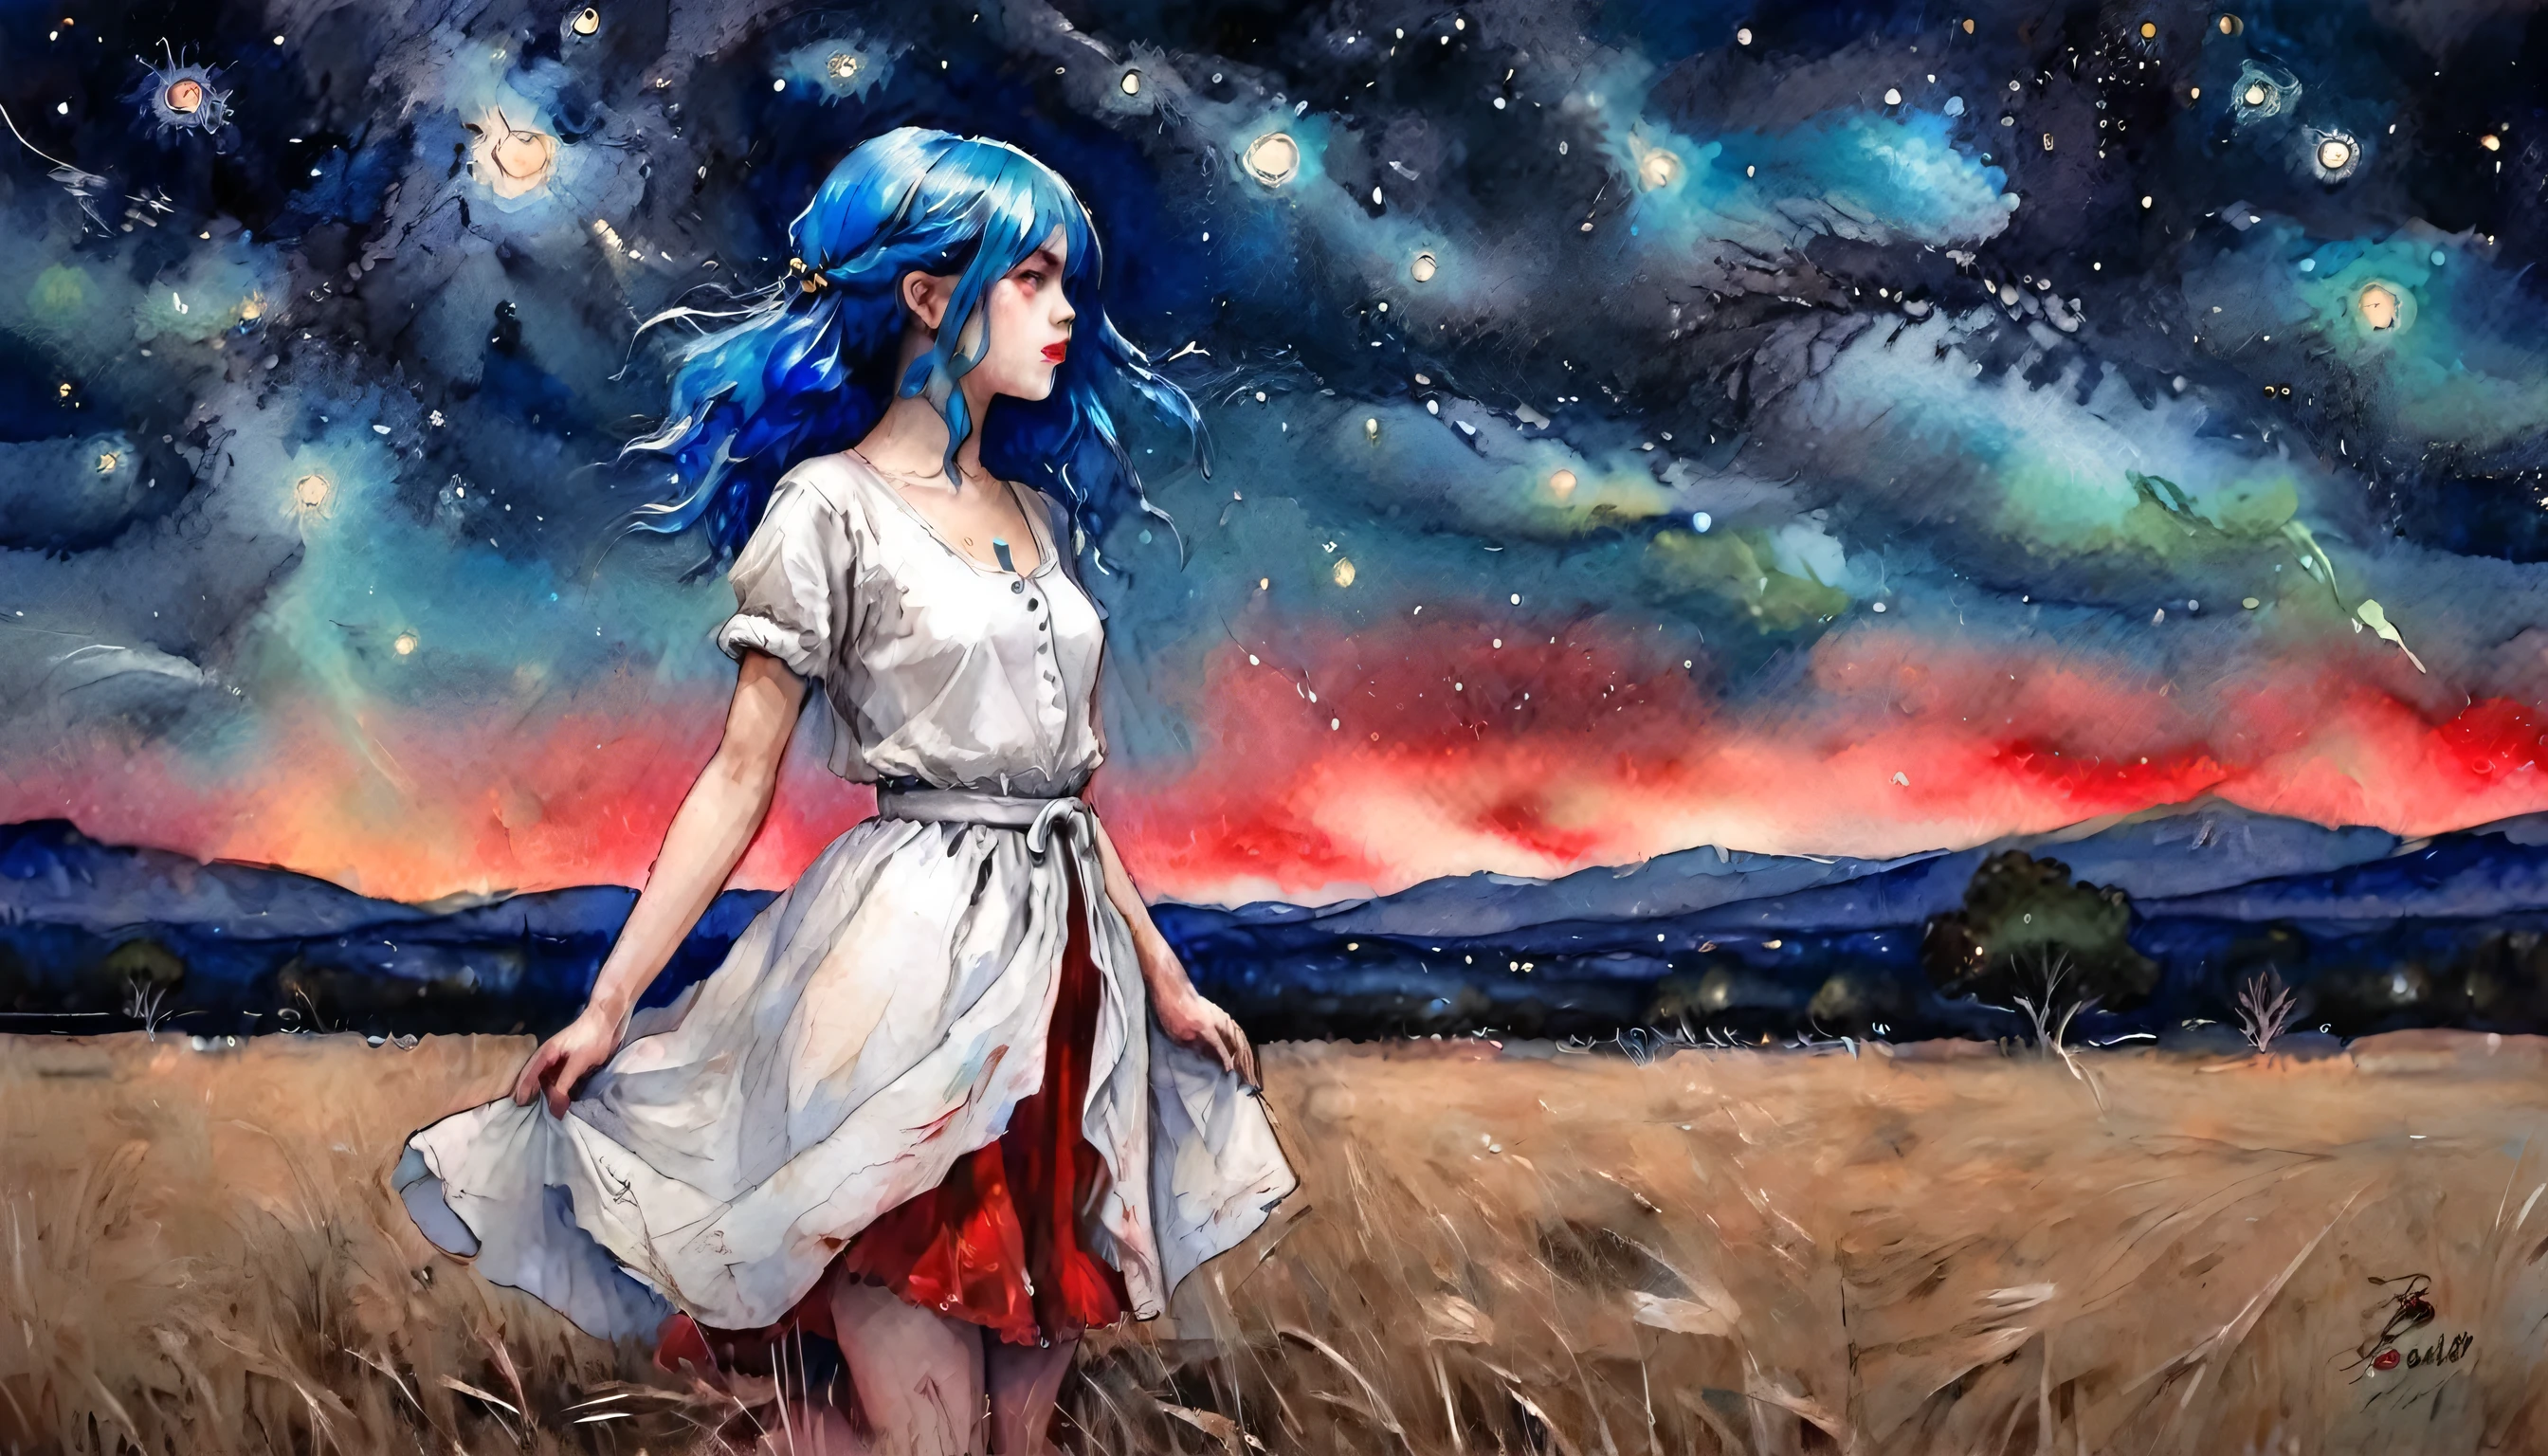 a girl, blue hair, wearing a light white outfit and a red skirt, positioned in an open field, night, detailed starry sky, wonderful art, vibrant colors, watercolor